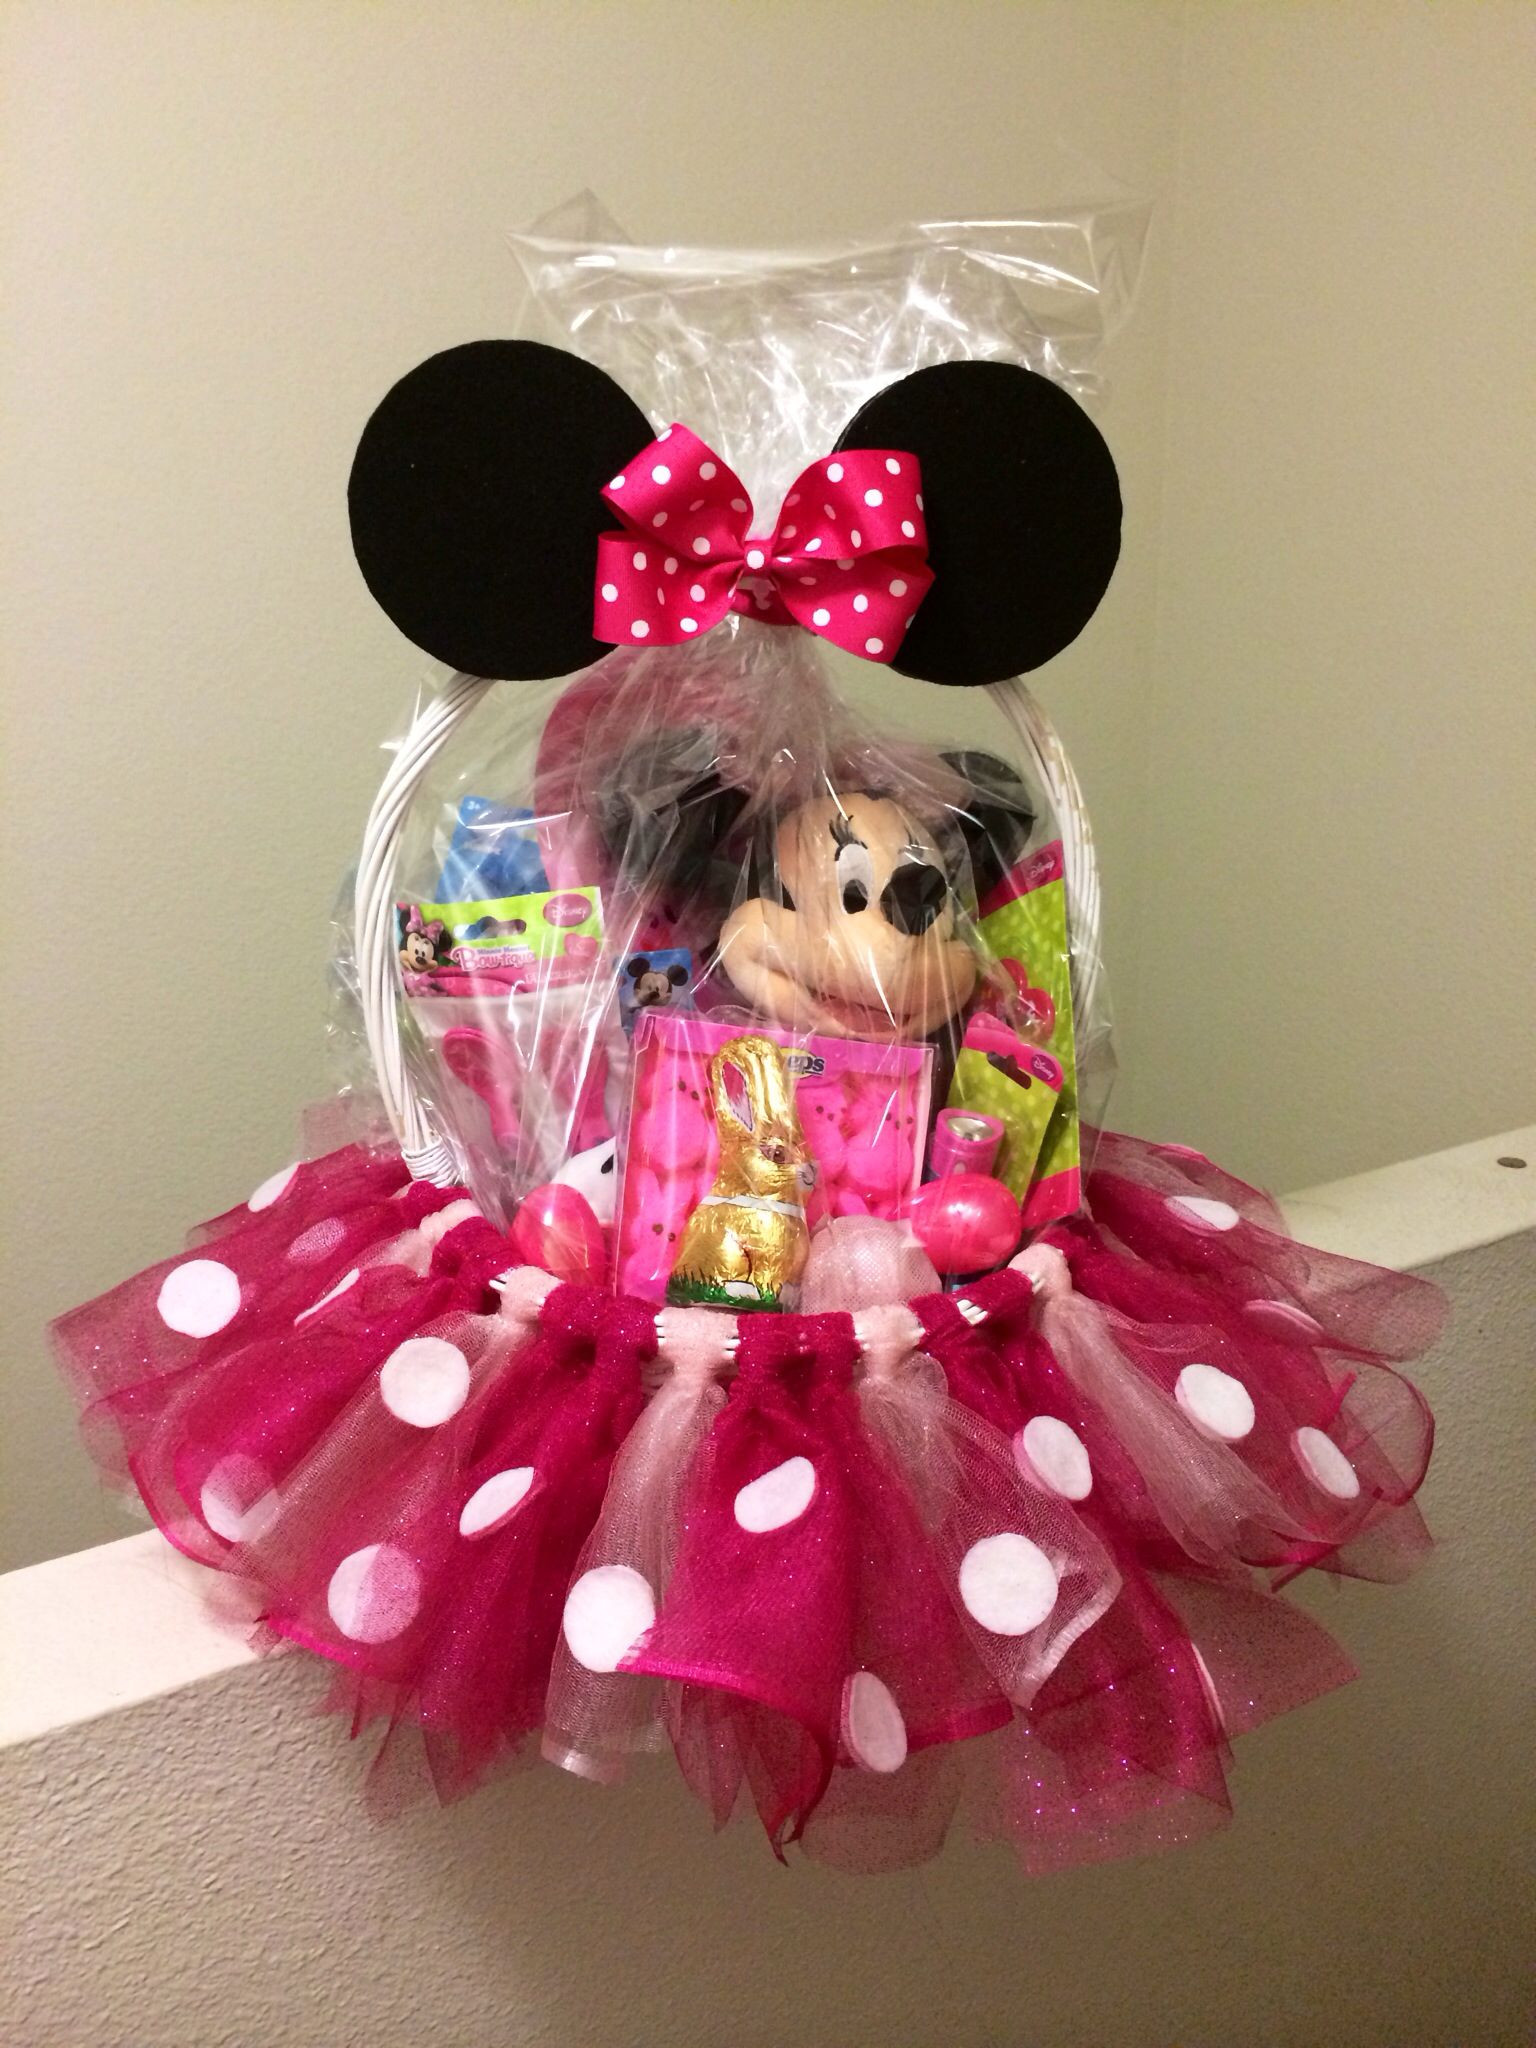 Disney Gift Ideas For Girlfriend
 The Ultimate List of Minnie Mouse Craft Ideas